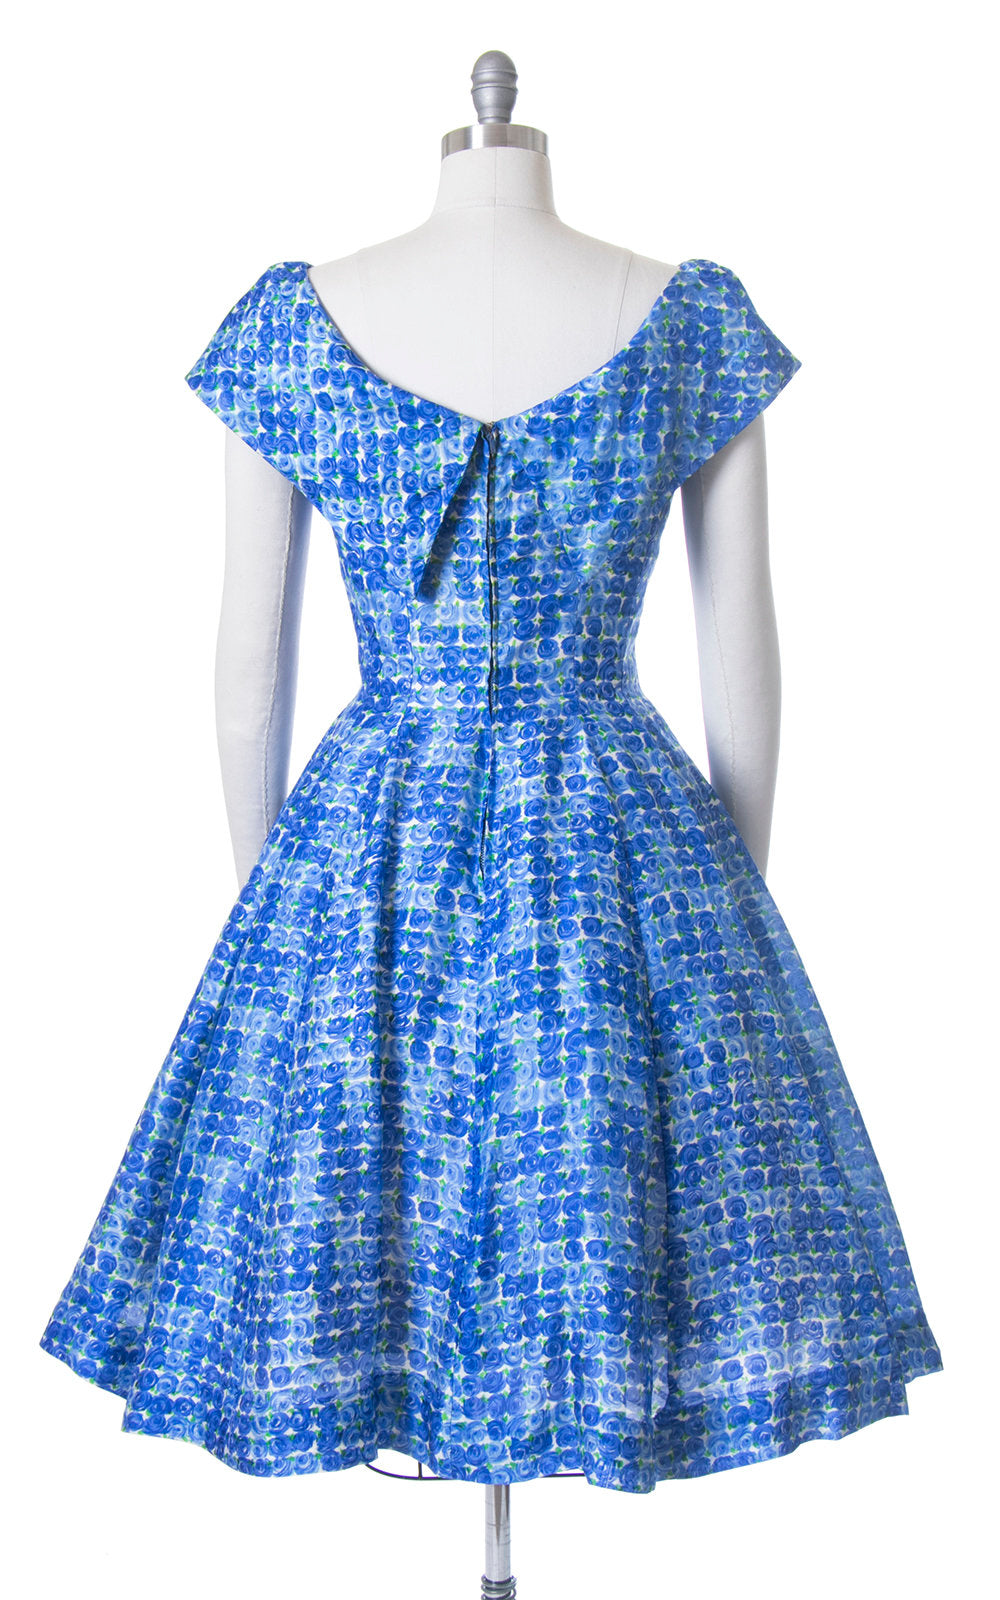 Vintage 1950s Dress | 50s GIGI YOUNG Silk Blue Rose Floral Print Full Skirt Party Dress with Petticoat (medium)